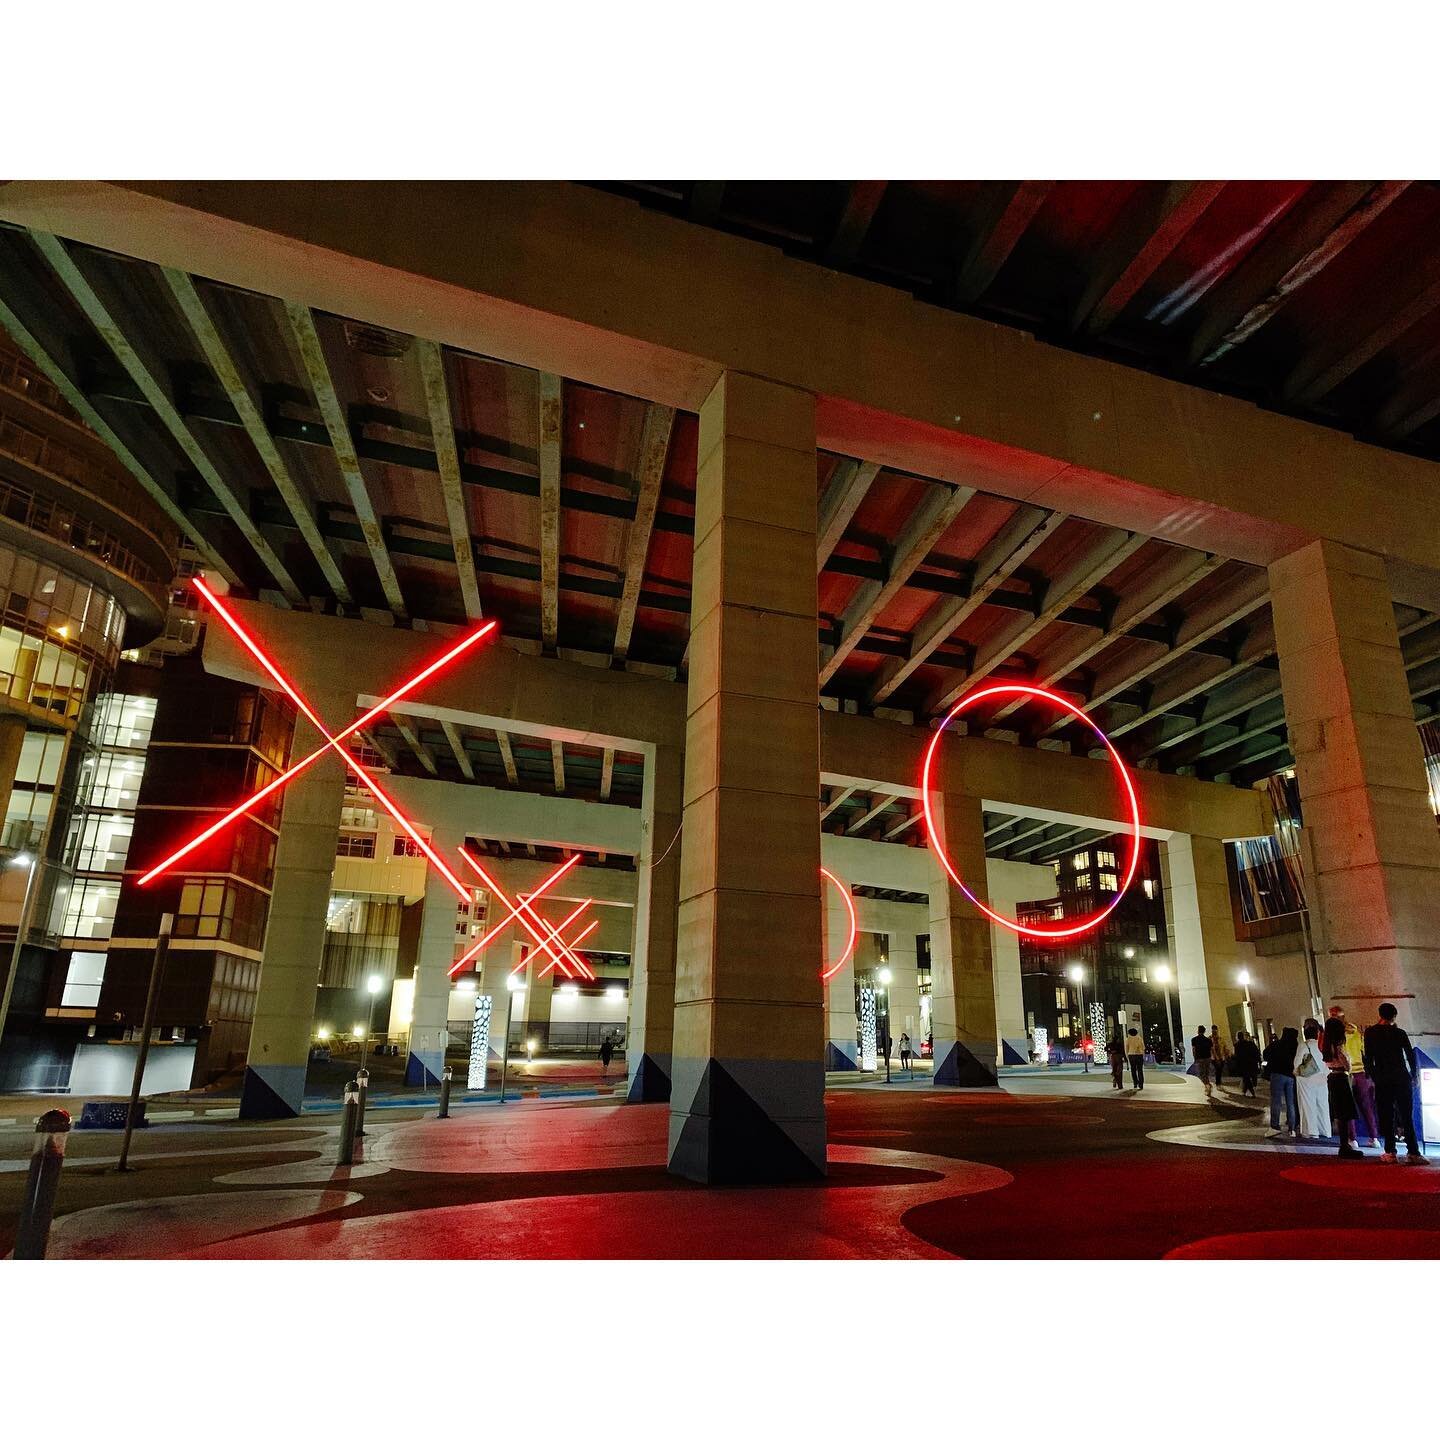 XO. &ldquo;the movement of light to express itself as both a means of bidding farewell and a welcoming...&rdquo; XO is a symbol of moving forward. #nuitblanchetoronto #nbto23 #publicart #findthelight #yyz